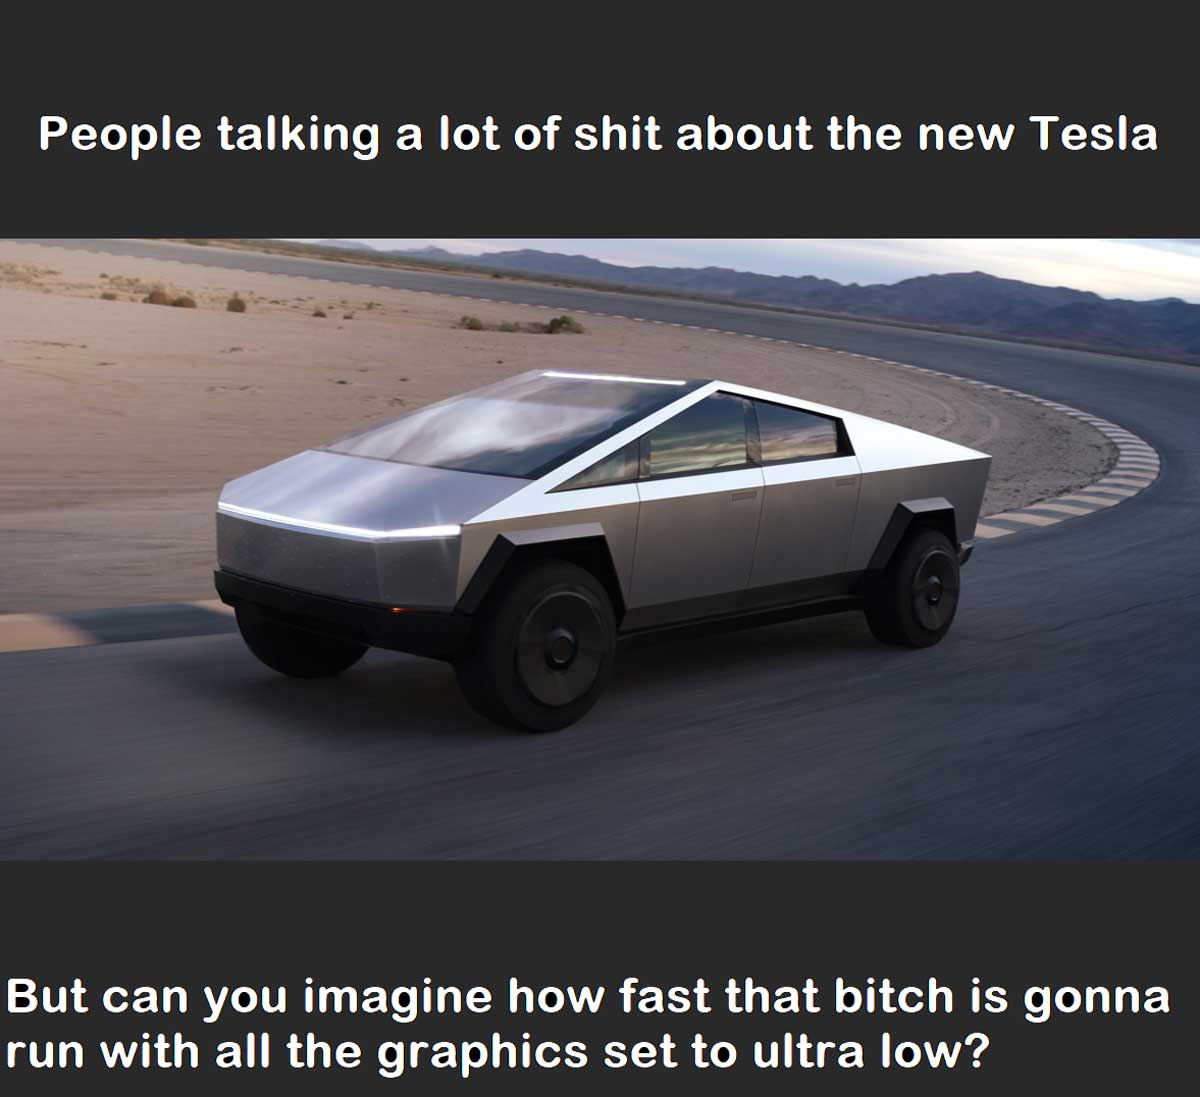 Photo of the new Tesla CyberTruck with the caption 'People talking a lot of shit about the new Tesla but can you imagine how fast that bitch is gonna run with all the graphics set to ultra low'